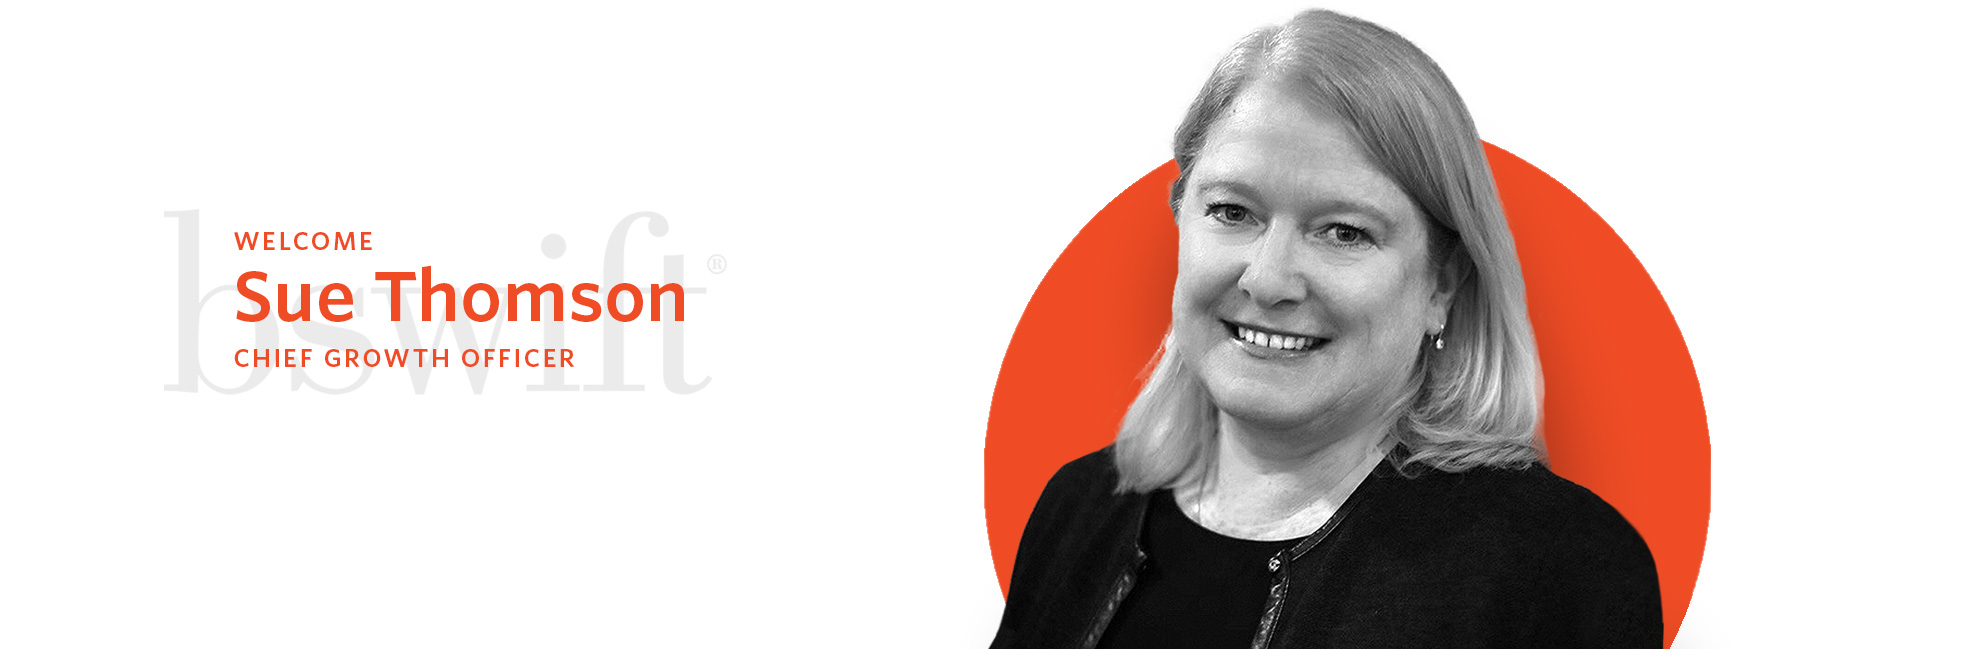 Welcome Sue Thomson, Chief Growth Officer